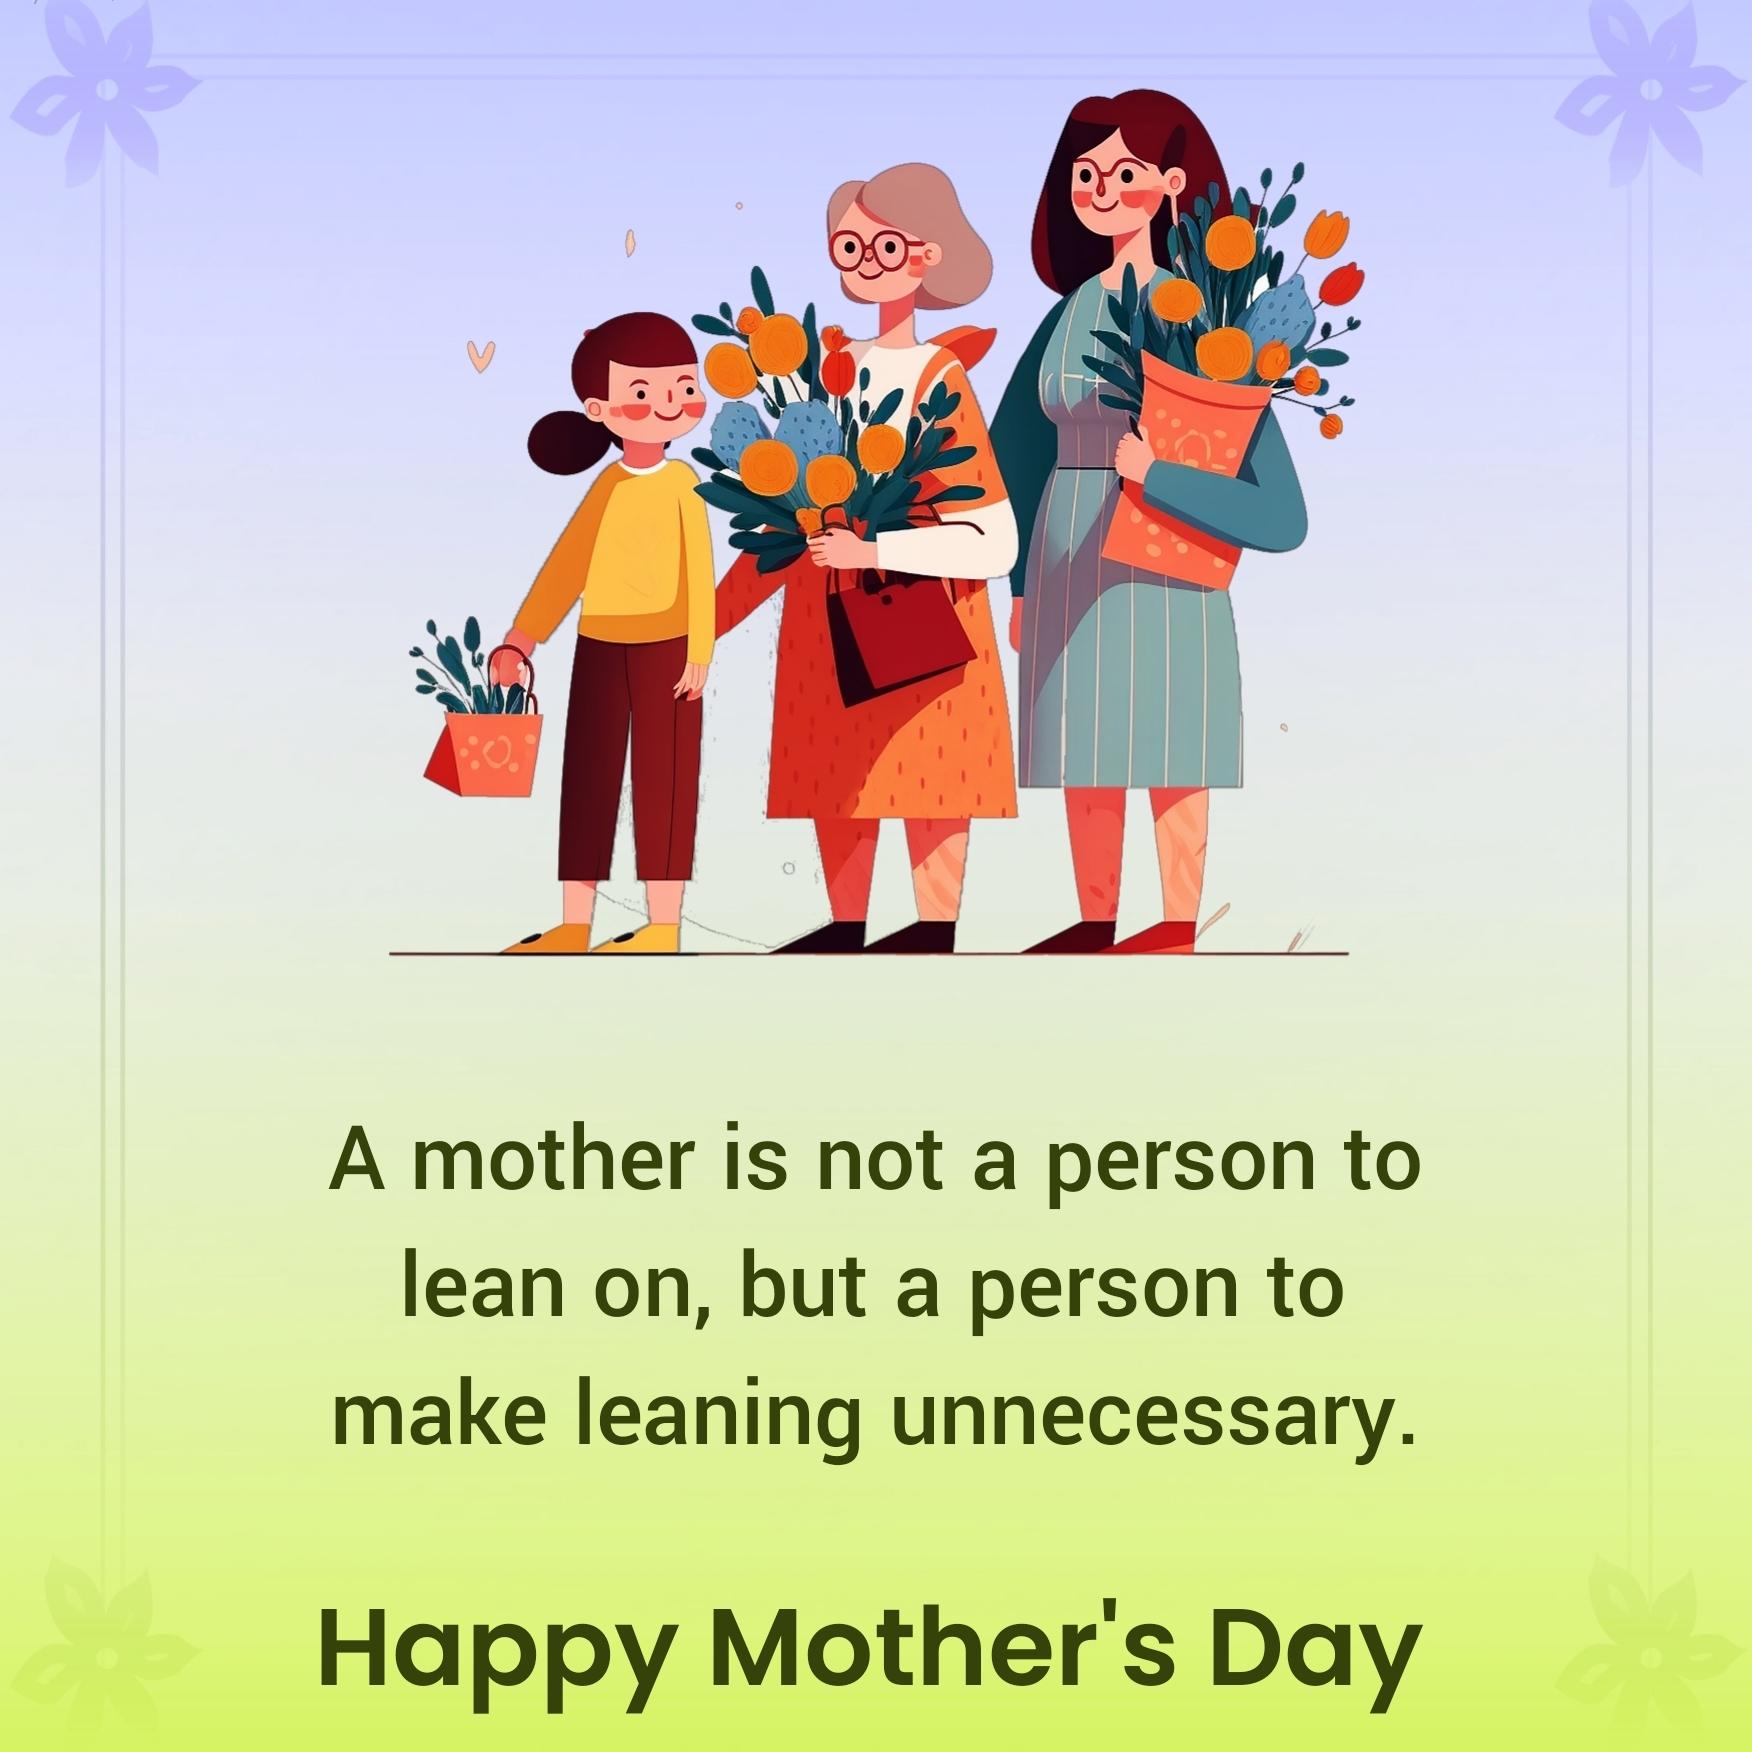 A mother is not a person to lean on but a person to make leaning